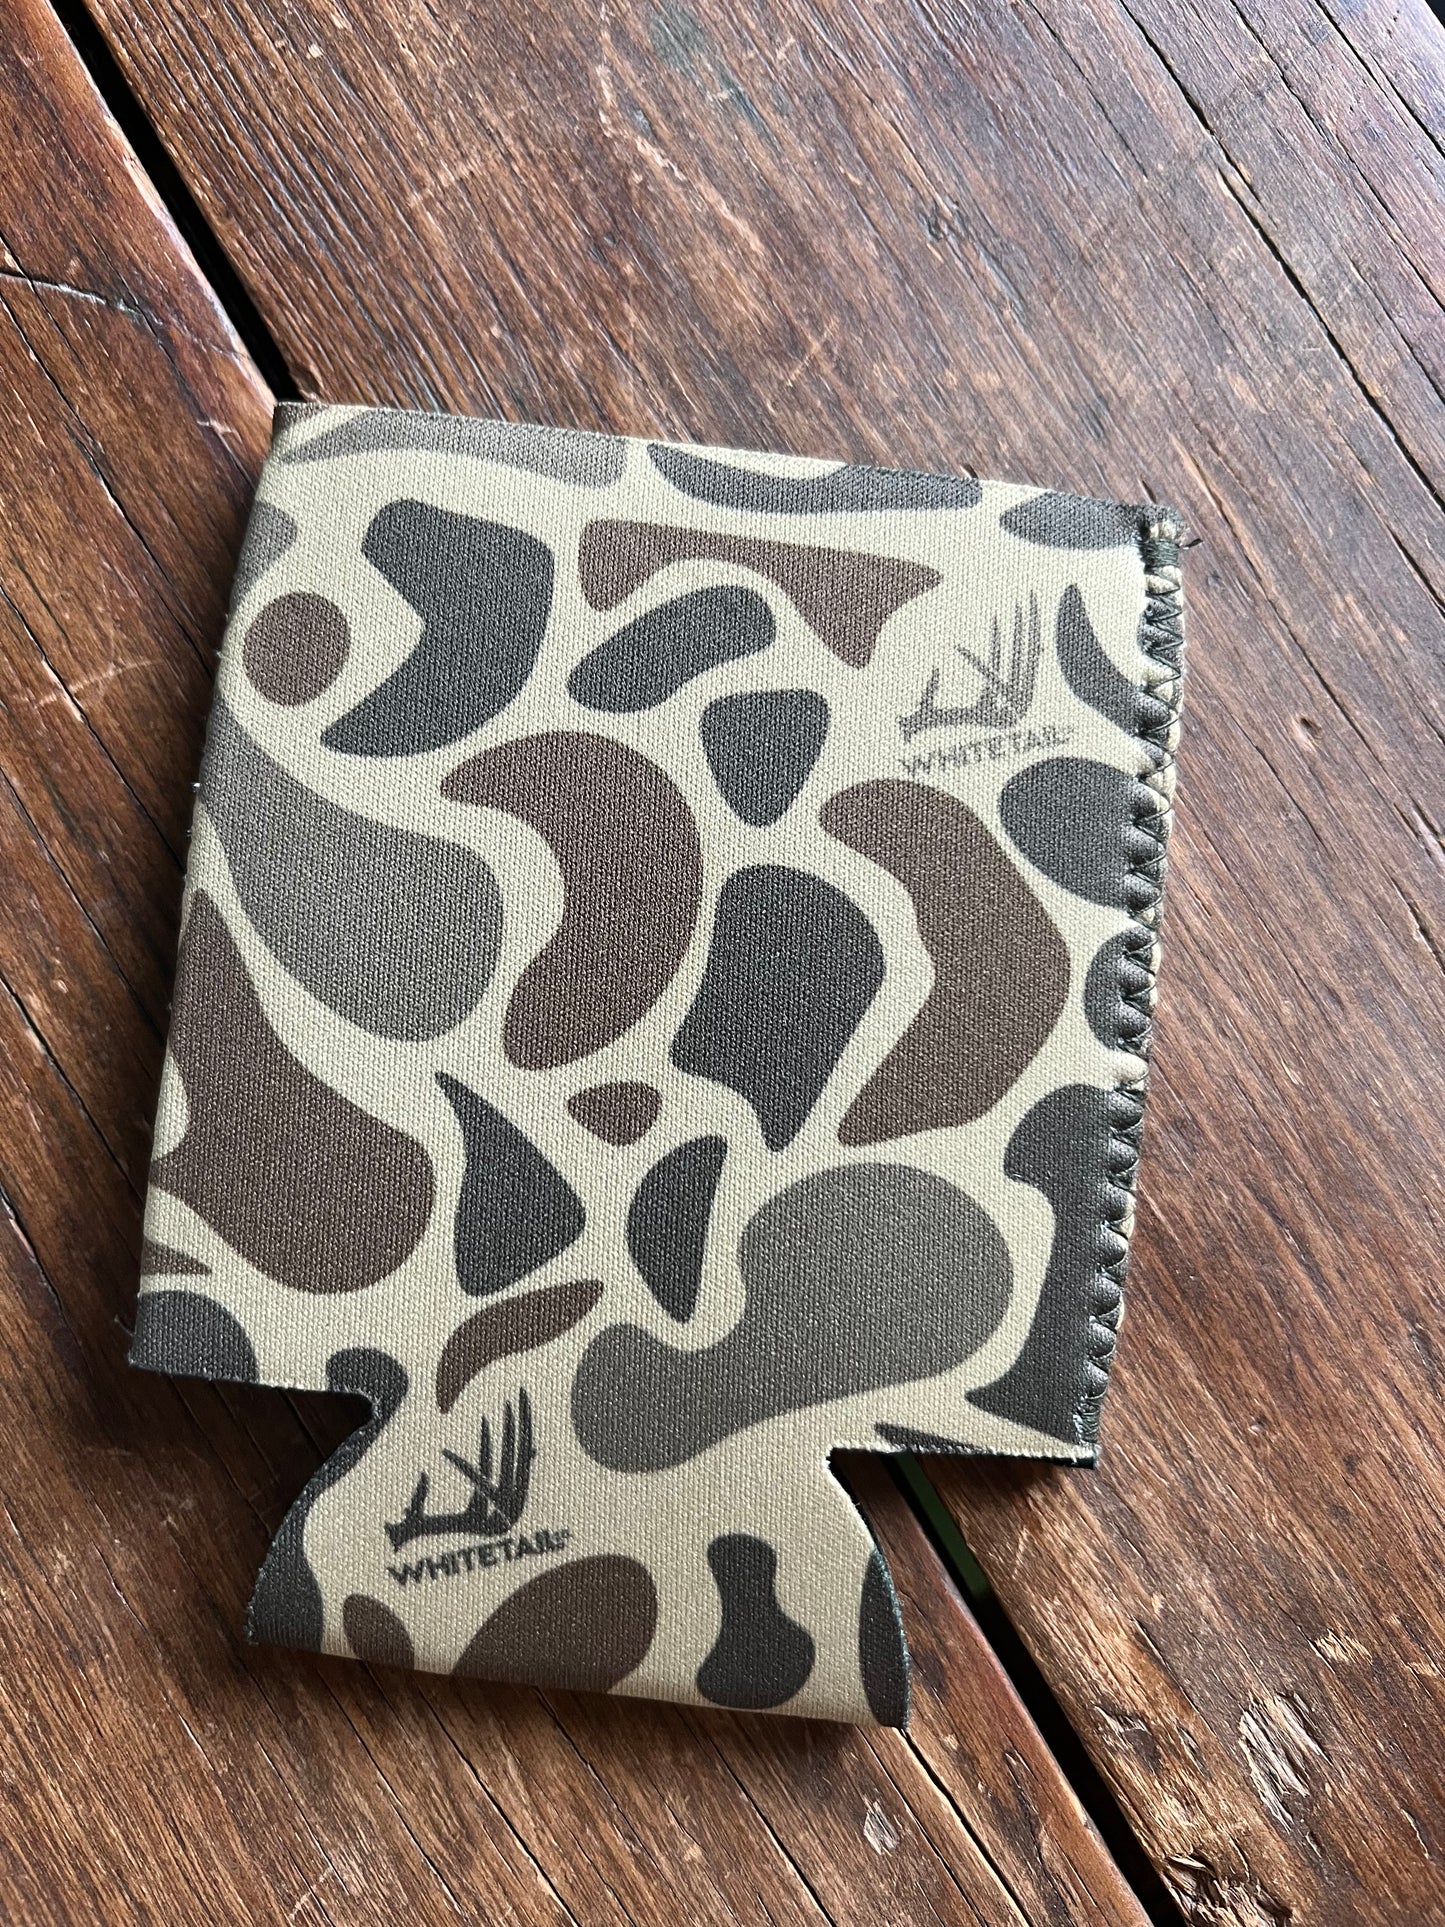 Whitetail Co. Old Camo Koozie 2 Pack